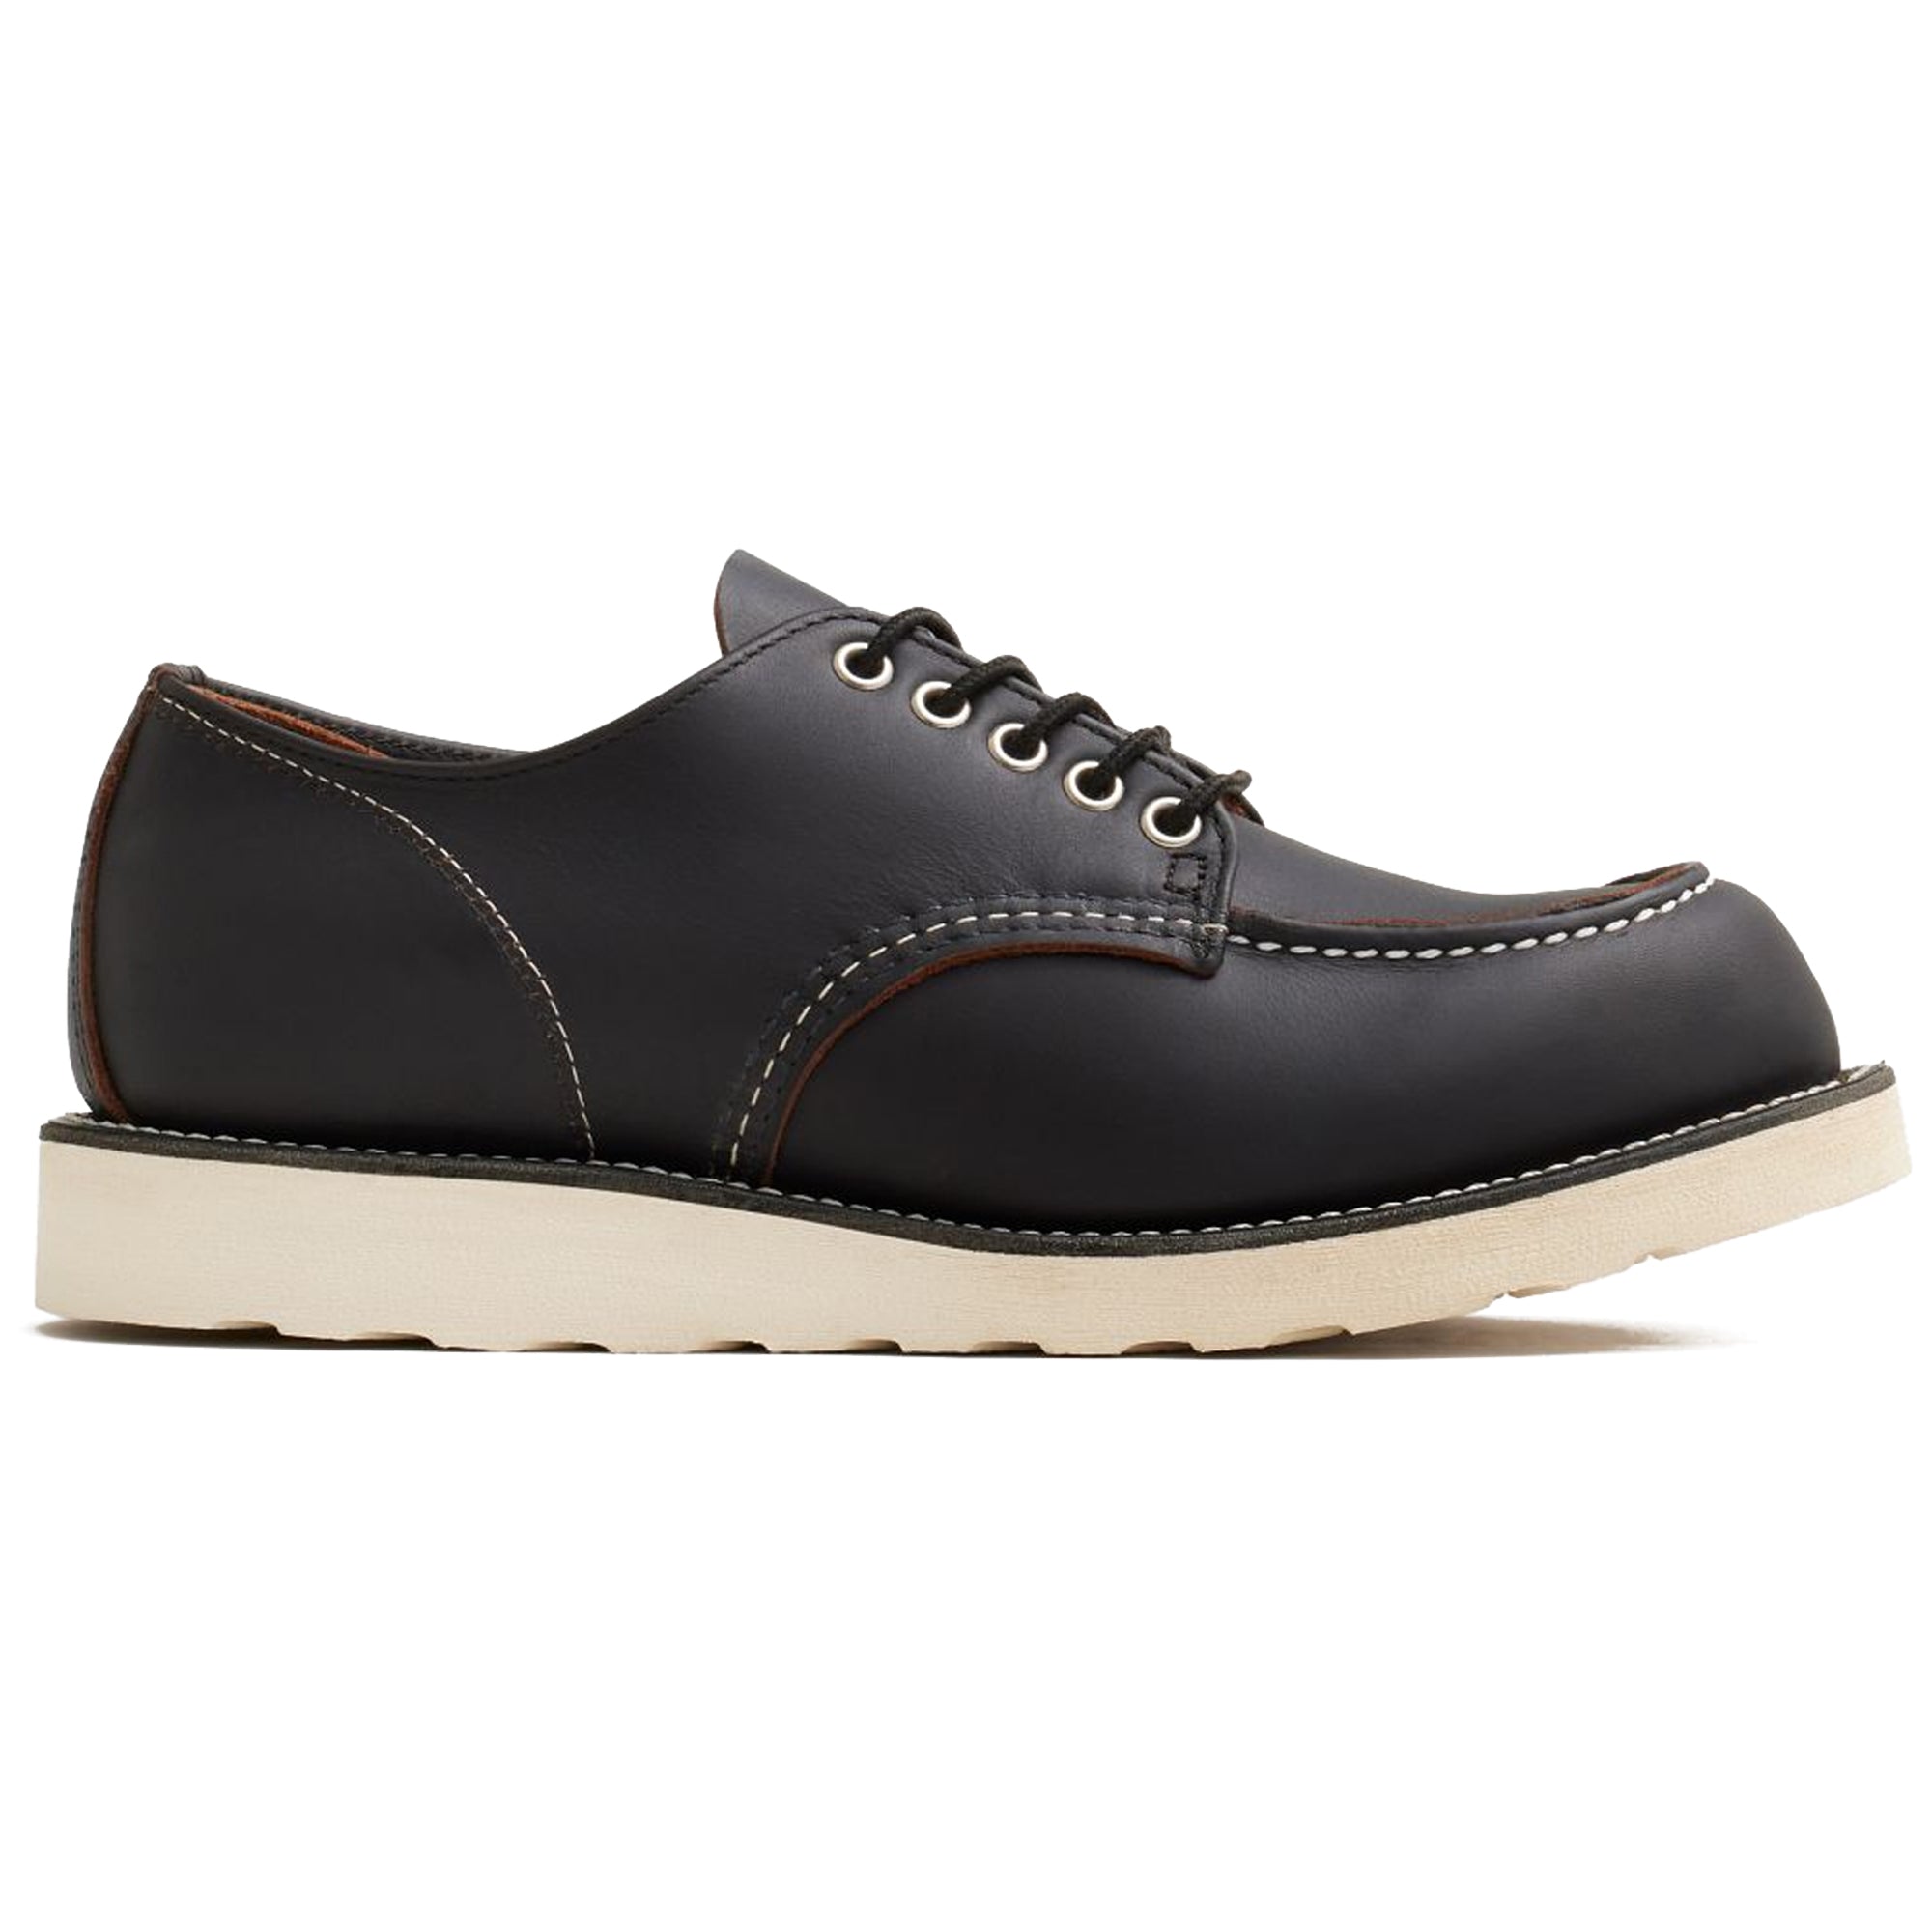 Red Wing 8090 Shop Moc Oxford Shoes – Black Prairie